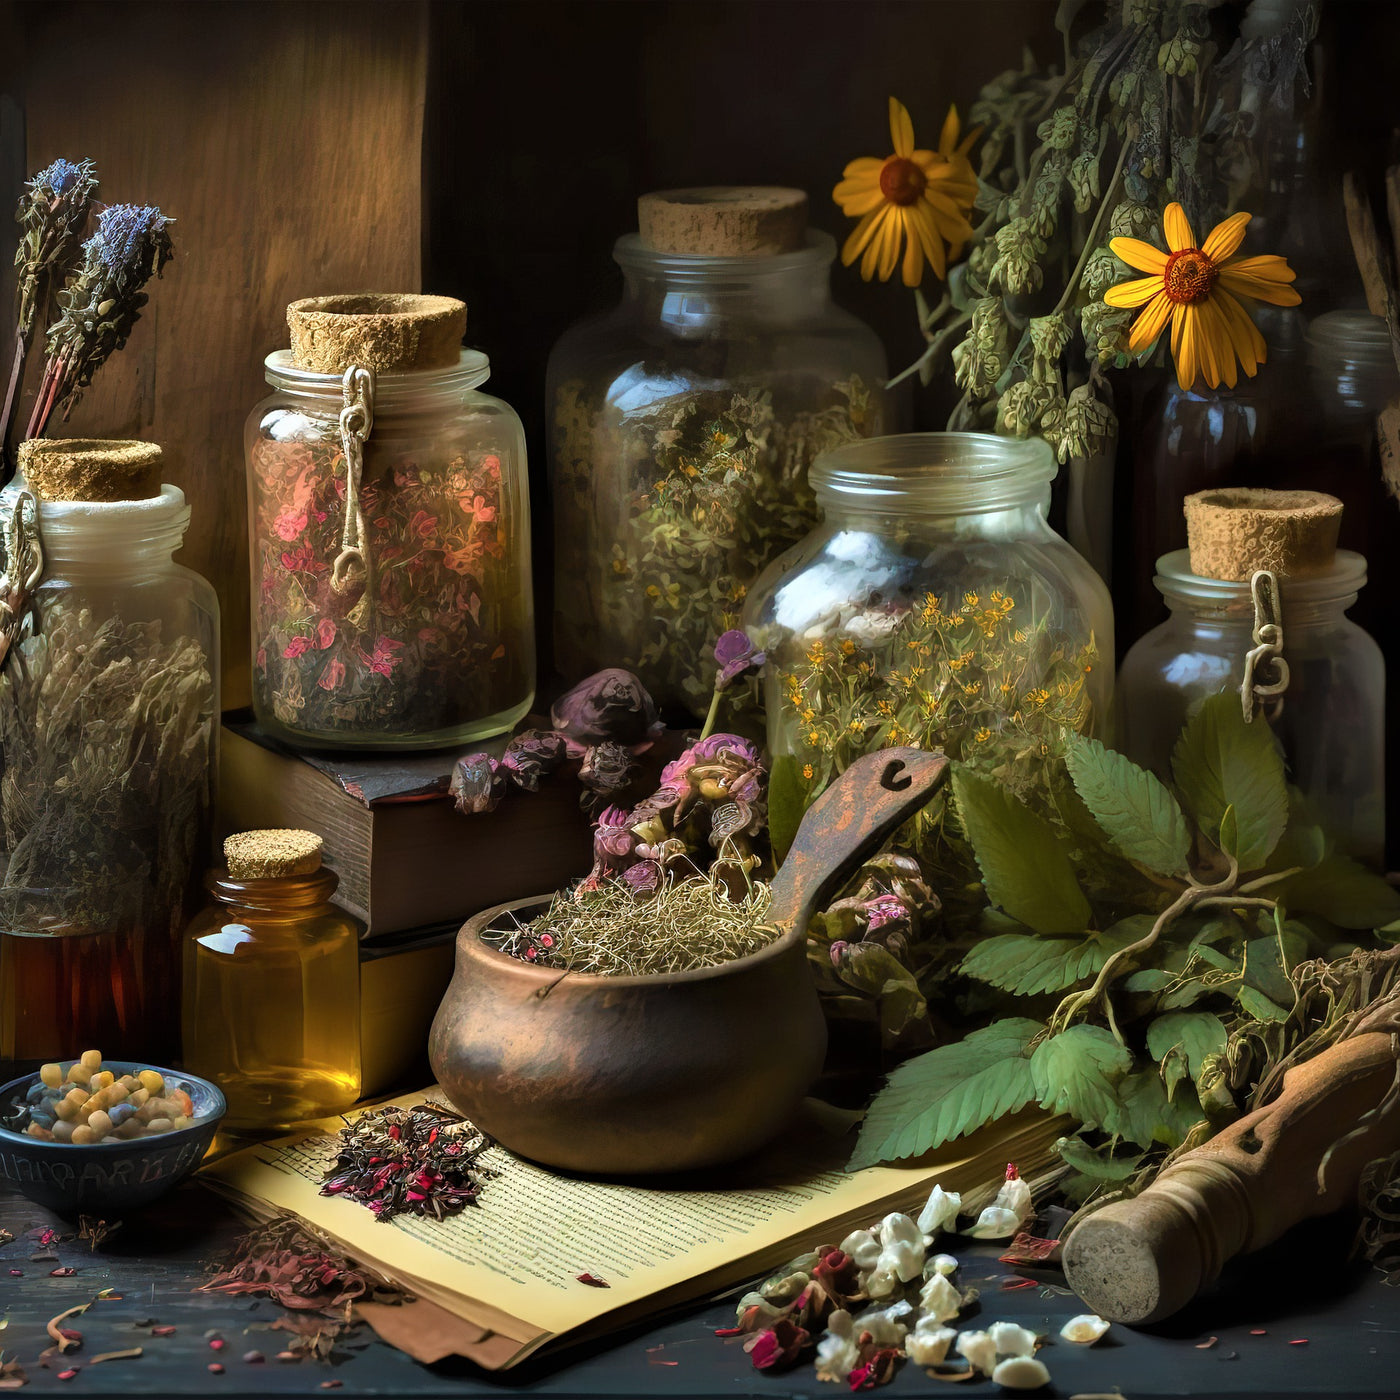 dried herbs and old jars